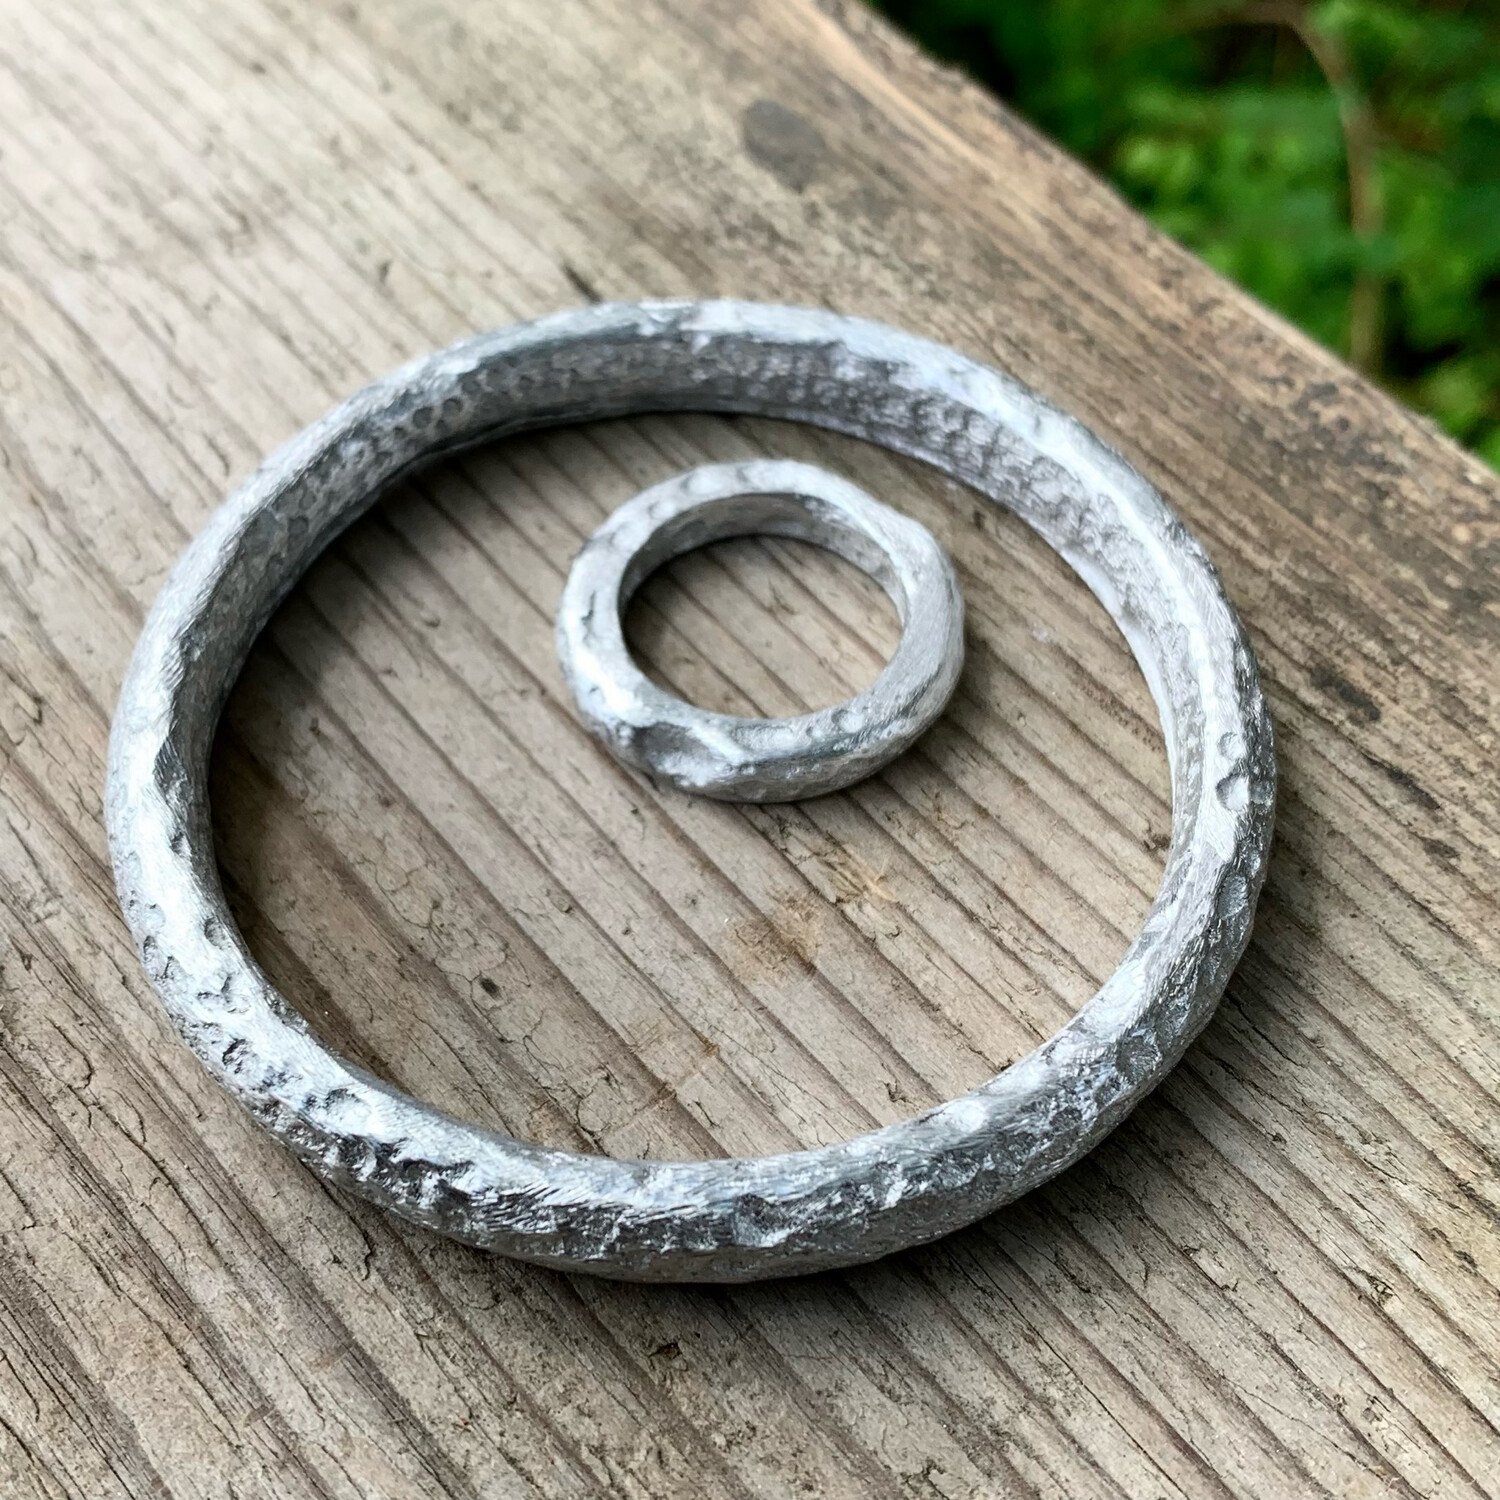 Make a Pewter Cast Bangle Workshop - One to One - 1 Day